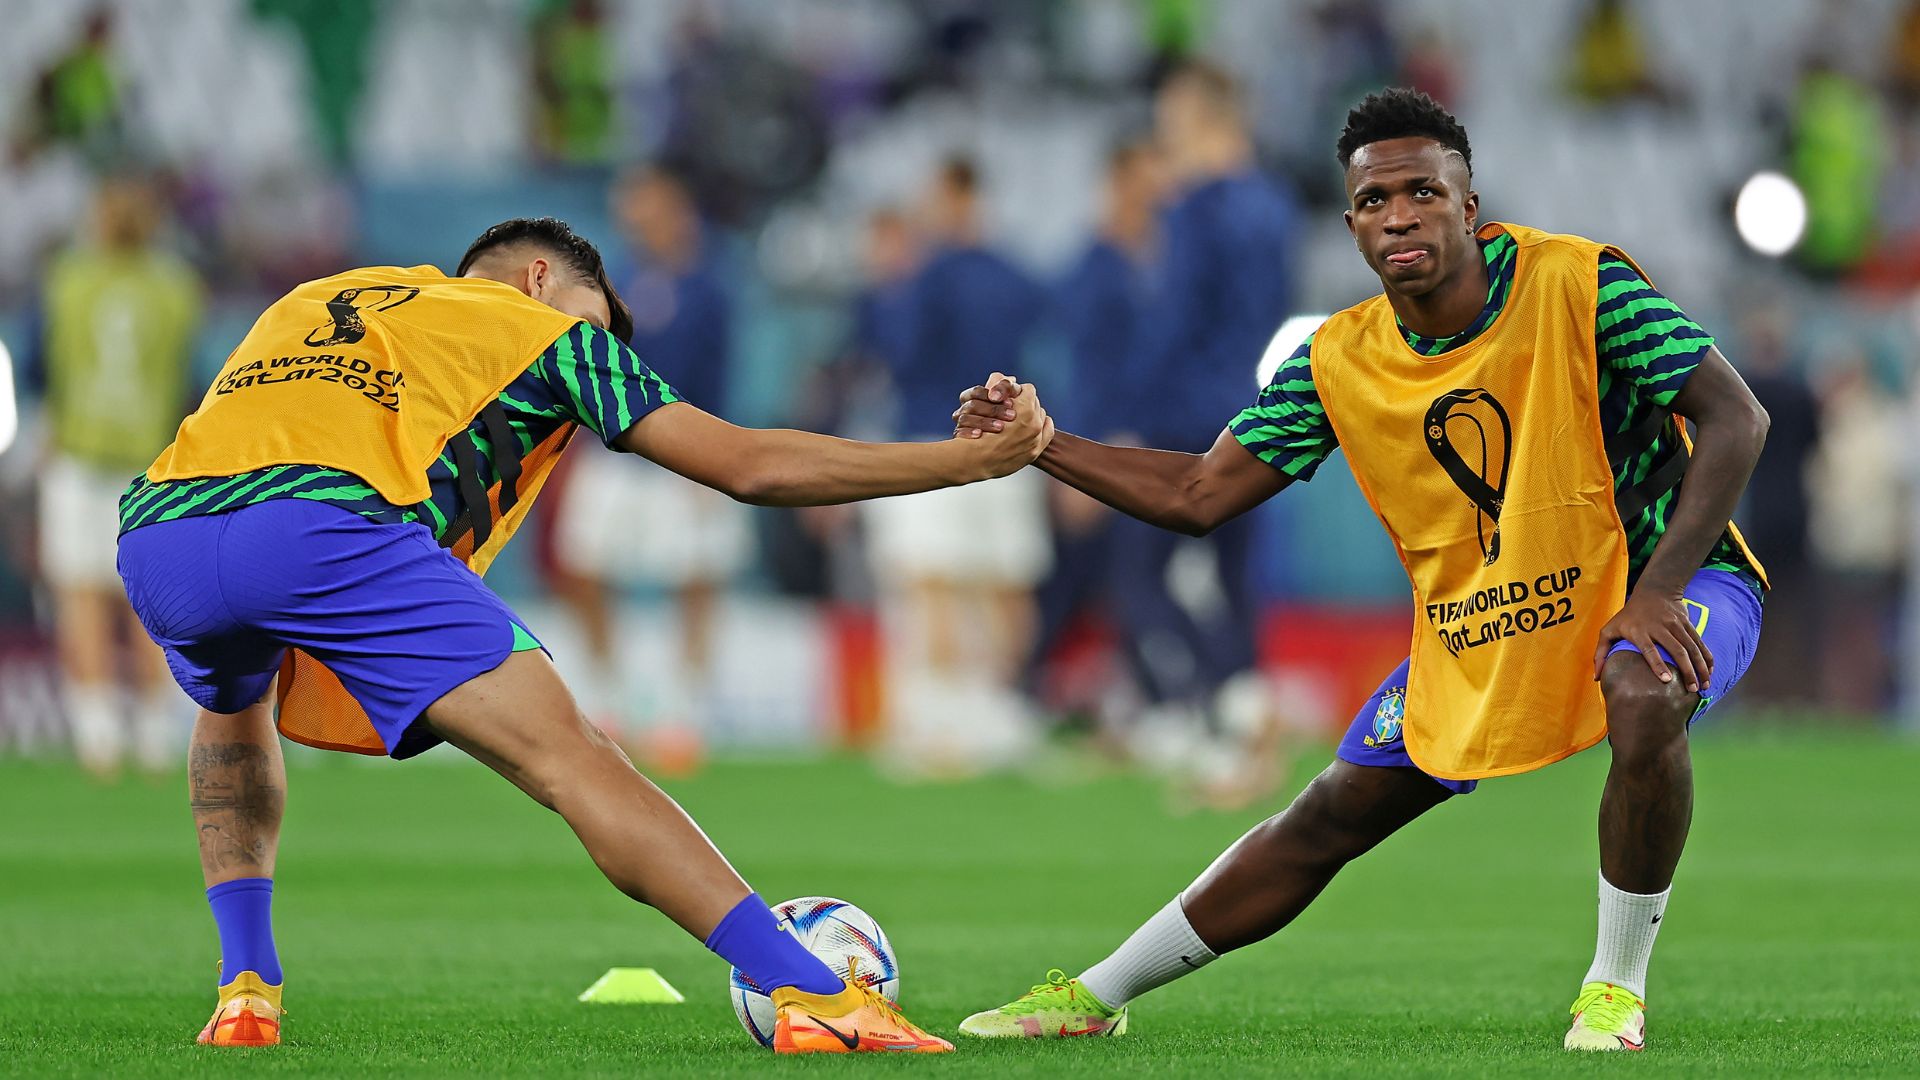 Paquetá and Vinicius Júnior stretching together, at the World Cup in Qatar (Credit: Getty Images)